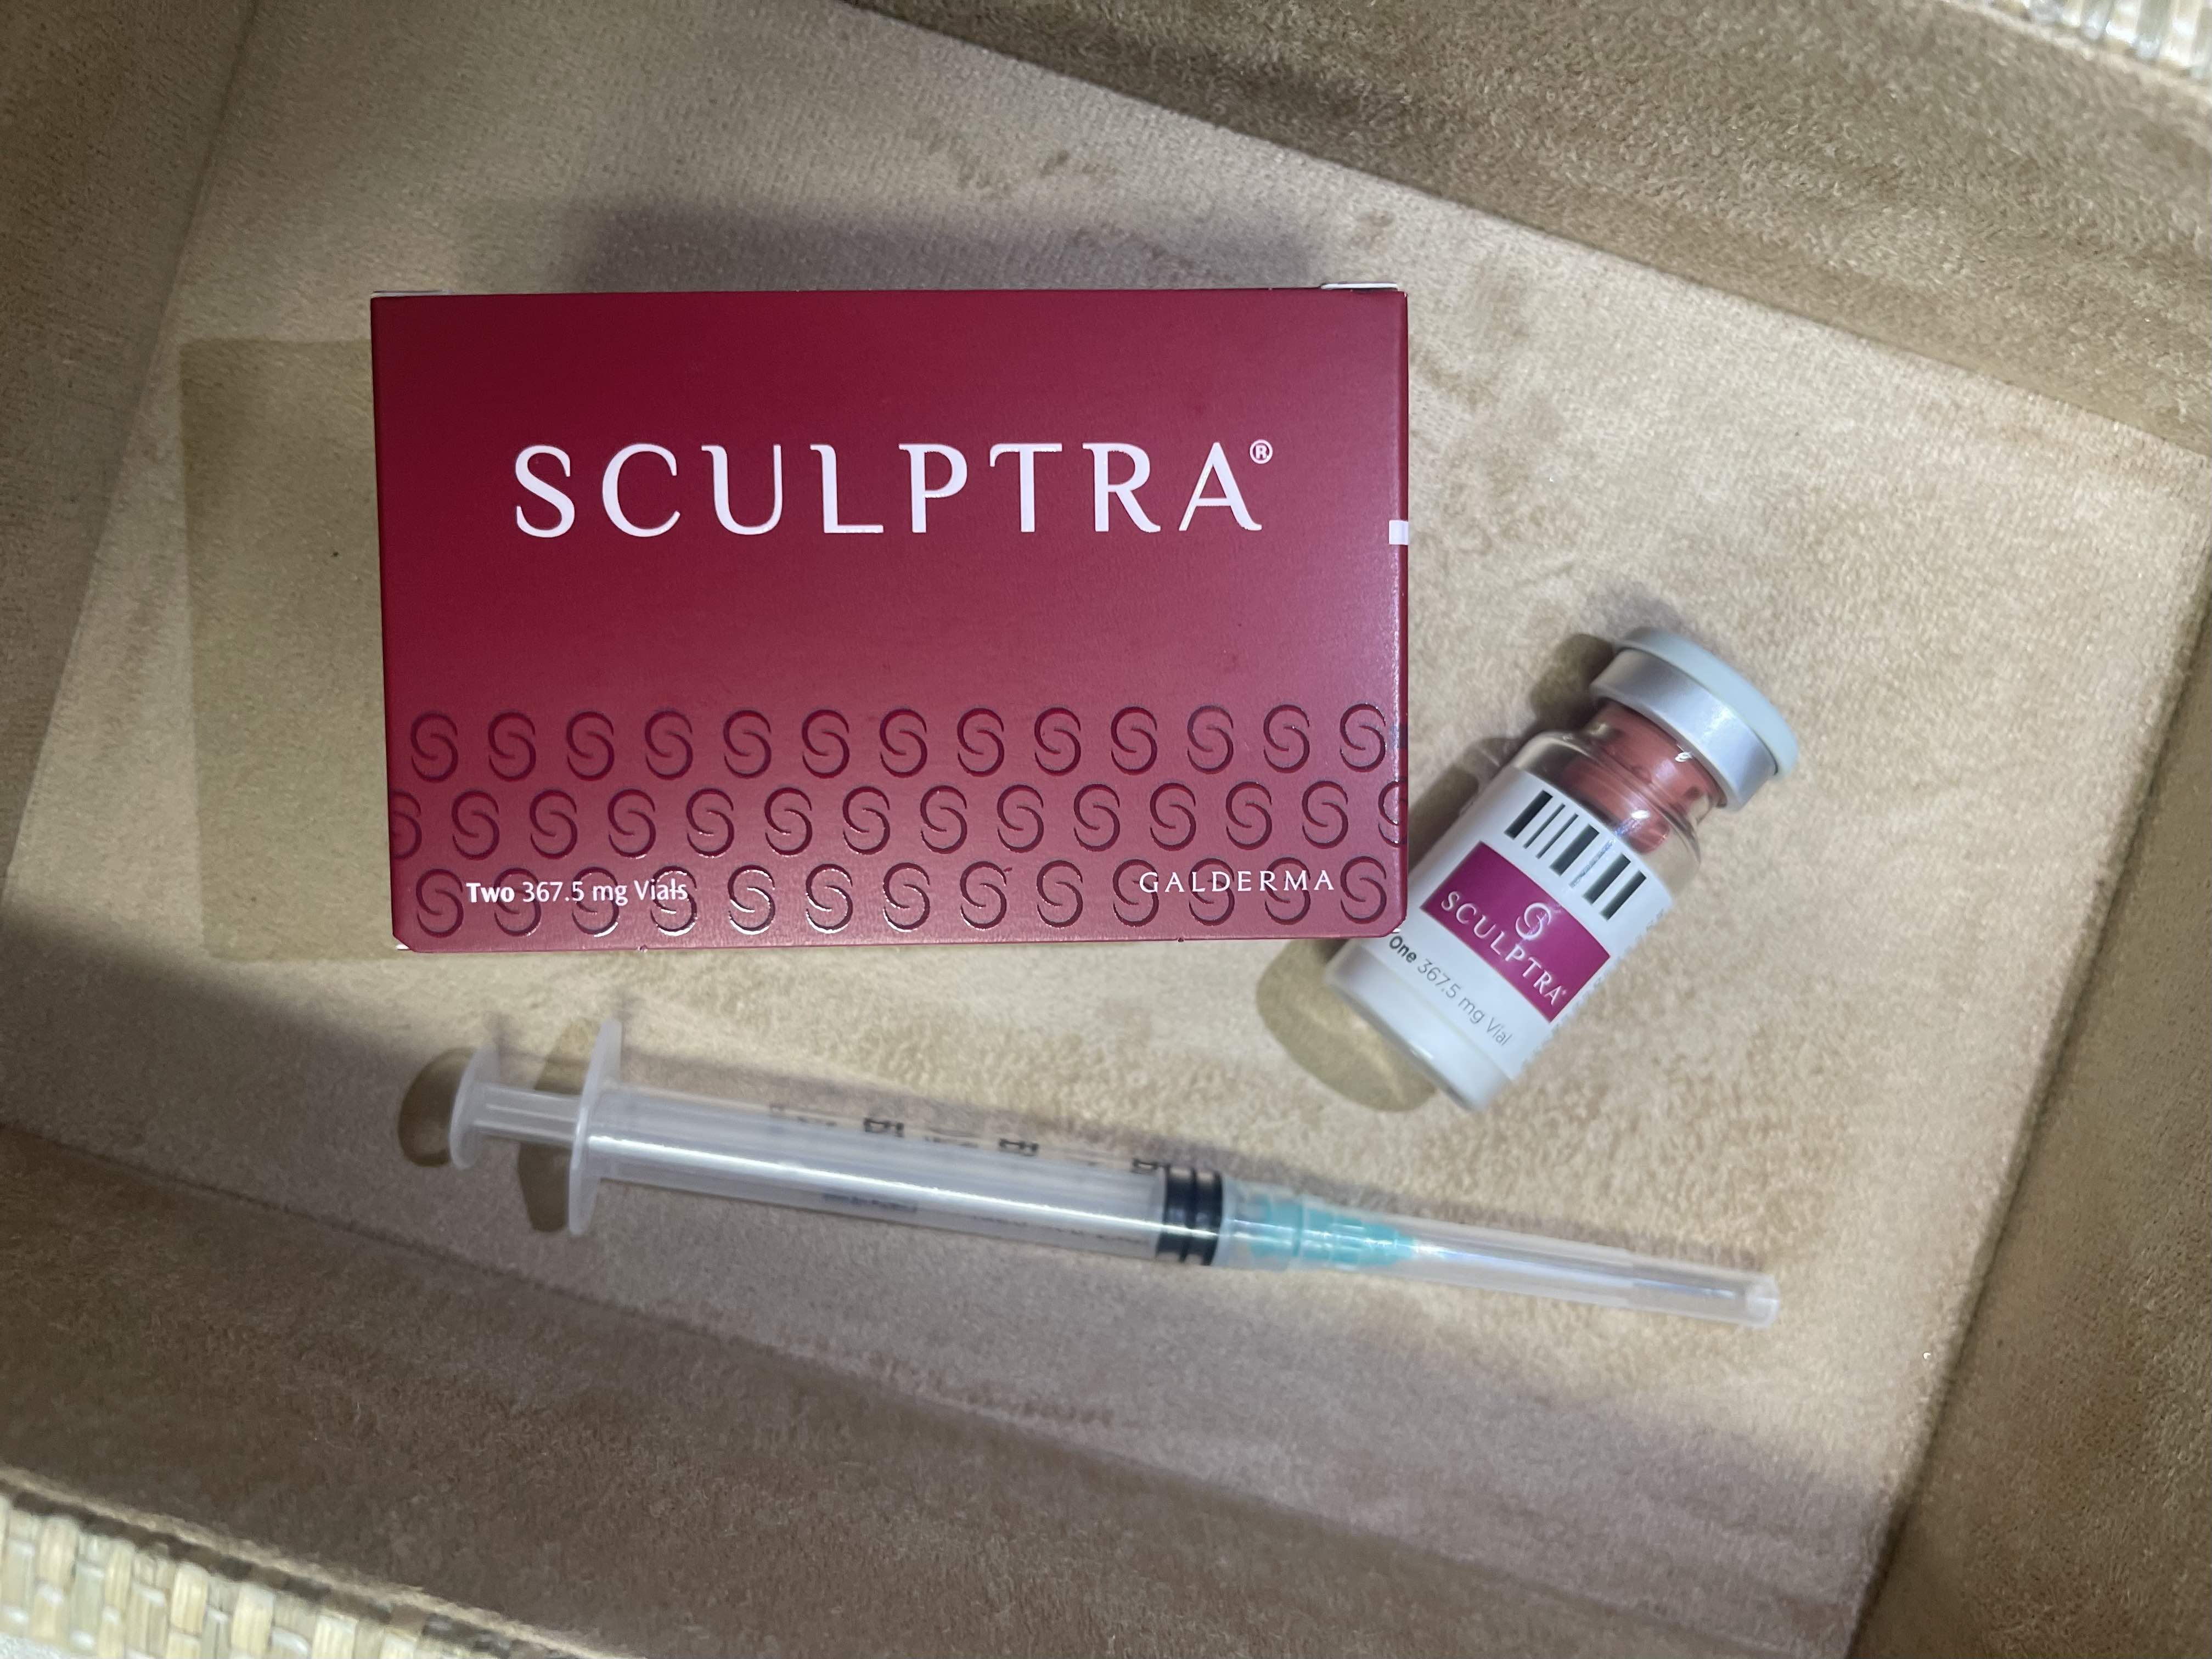 Sculptra injection box, vial and syringe at Refyned Aesthetics Medical Spa in Fresno California